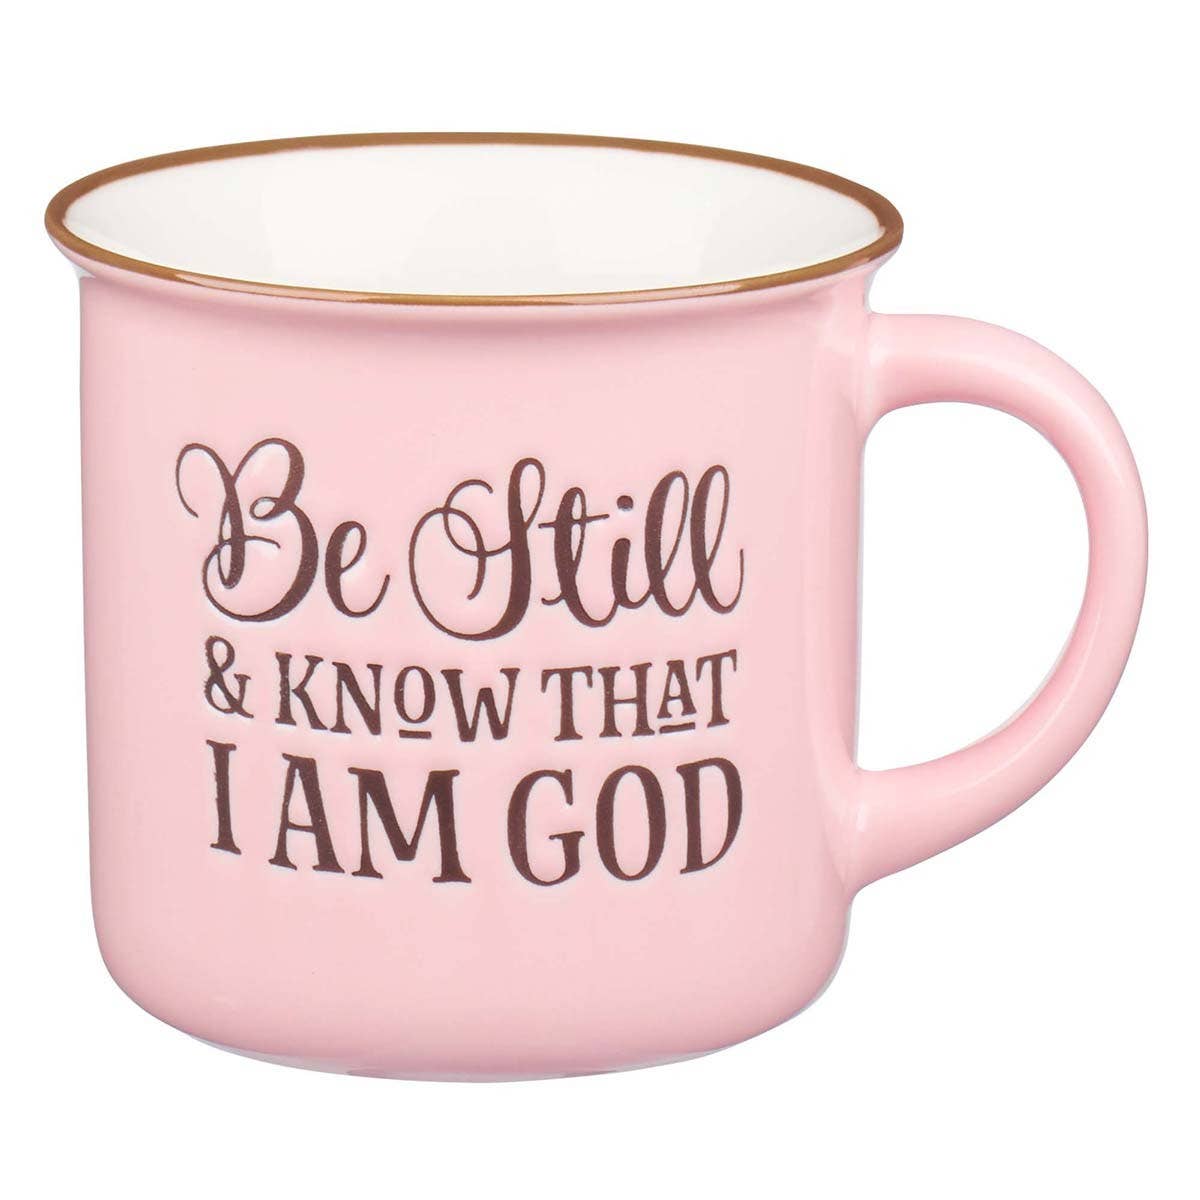 Be Still and Know Pink Camp-style Coffee Mug - Psalm 46:10